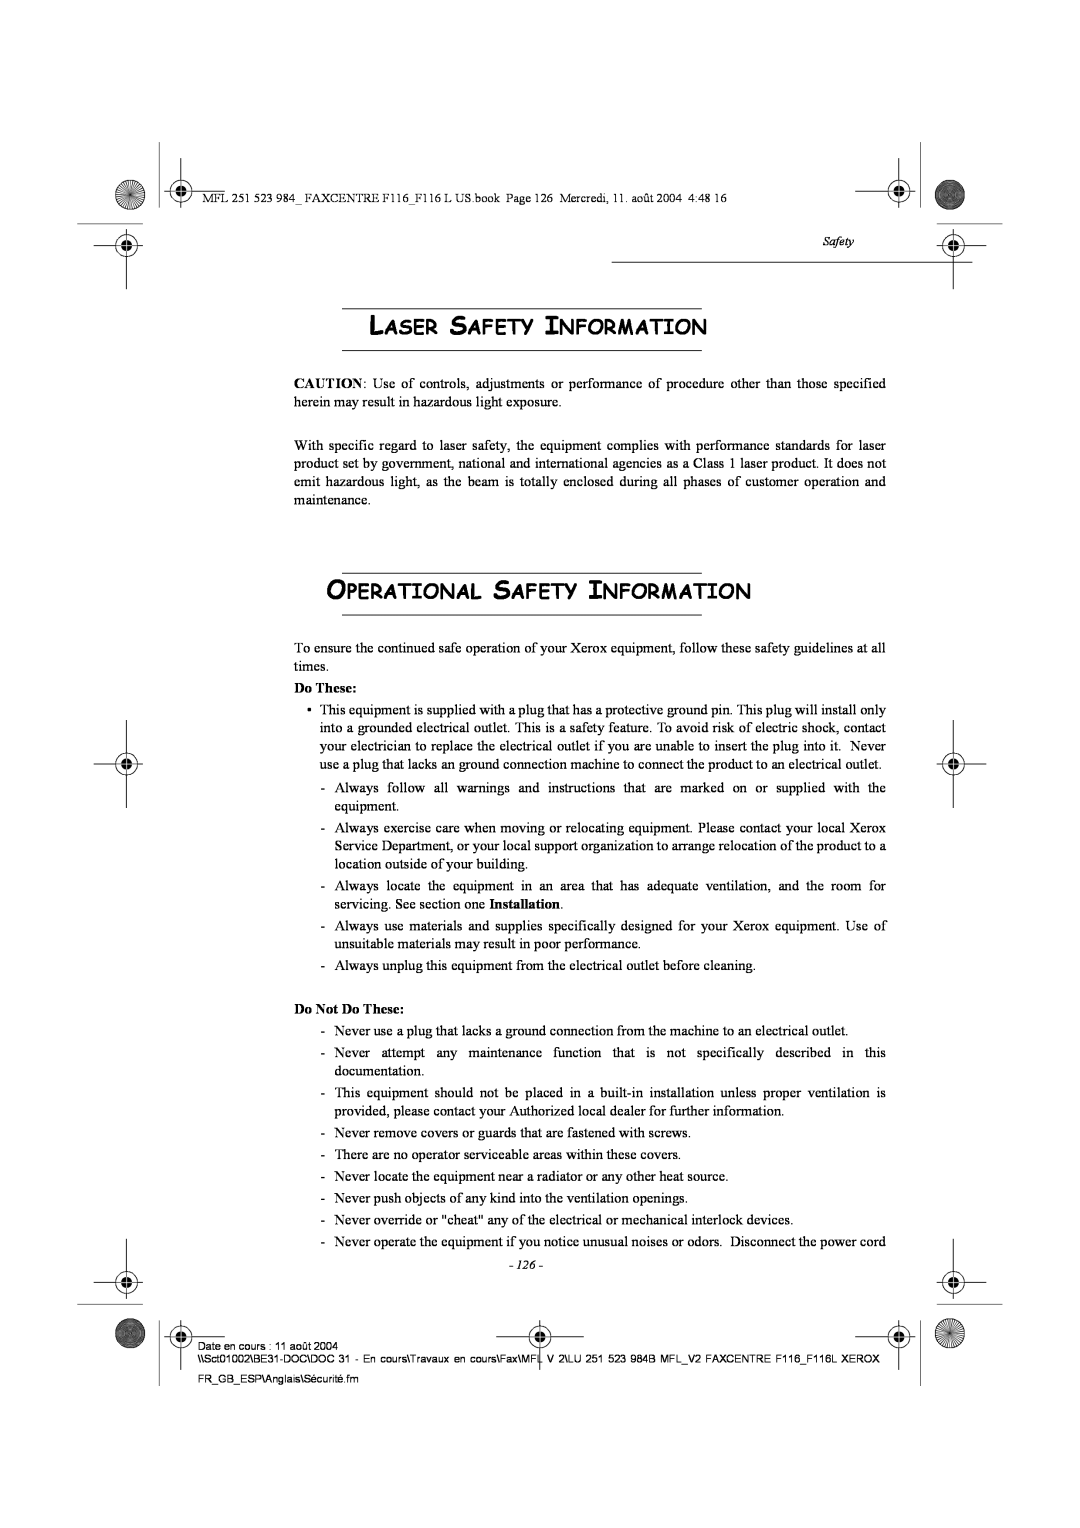 Xerox F116 user manual Laser Safety Information, Operational Safety Information, Do Not Do These 